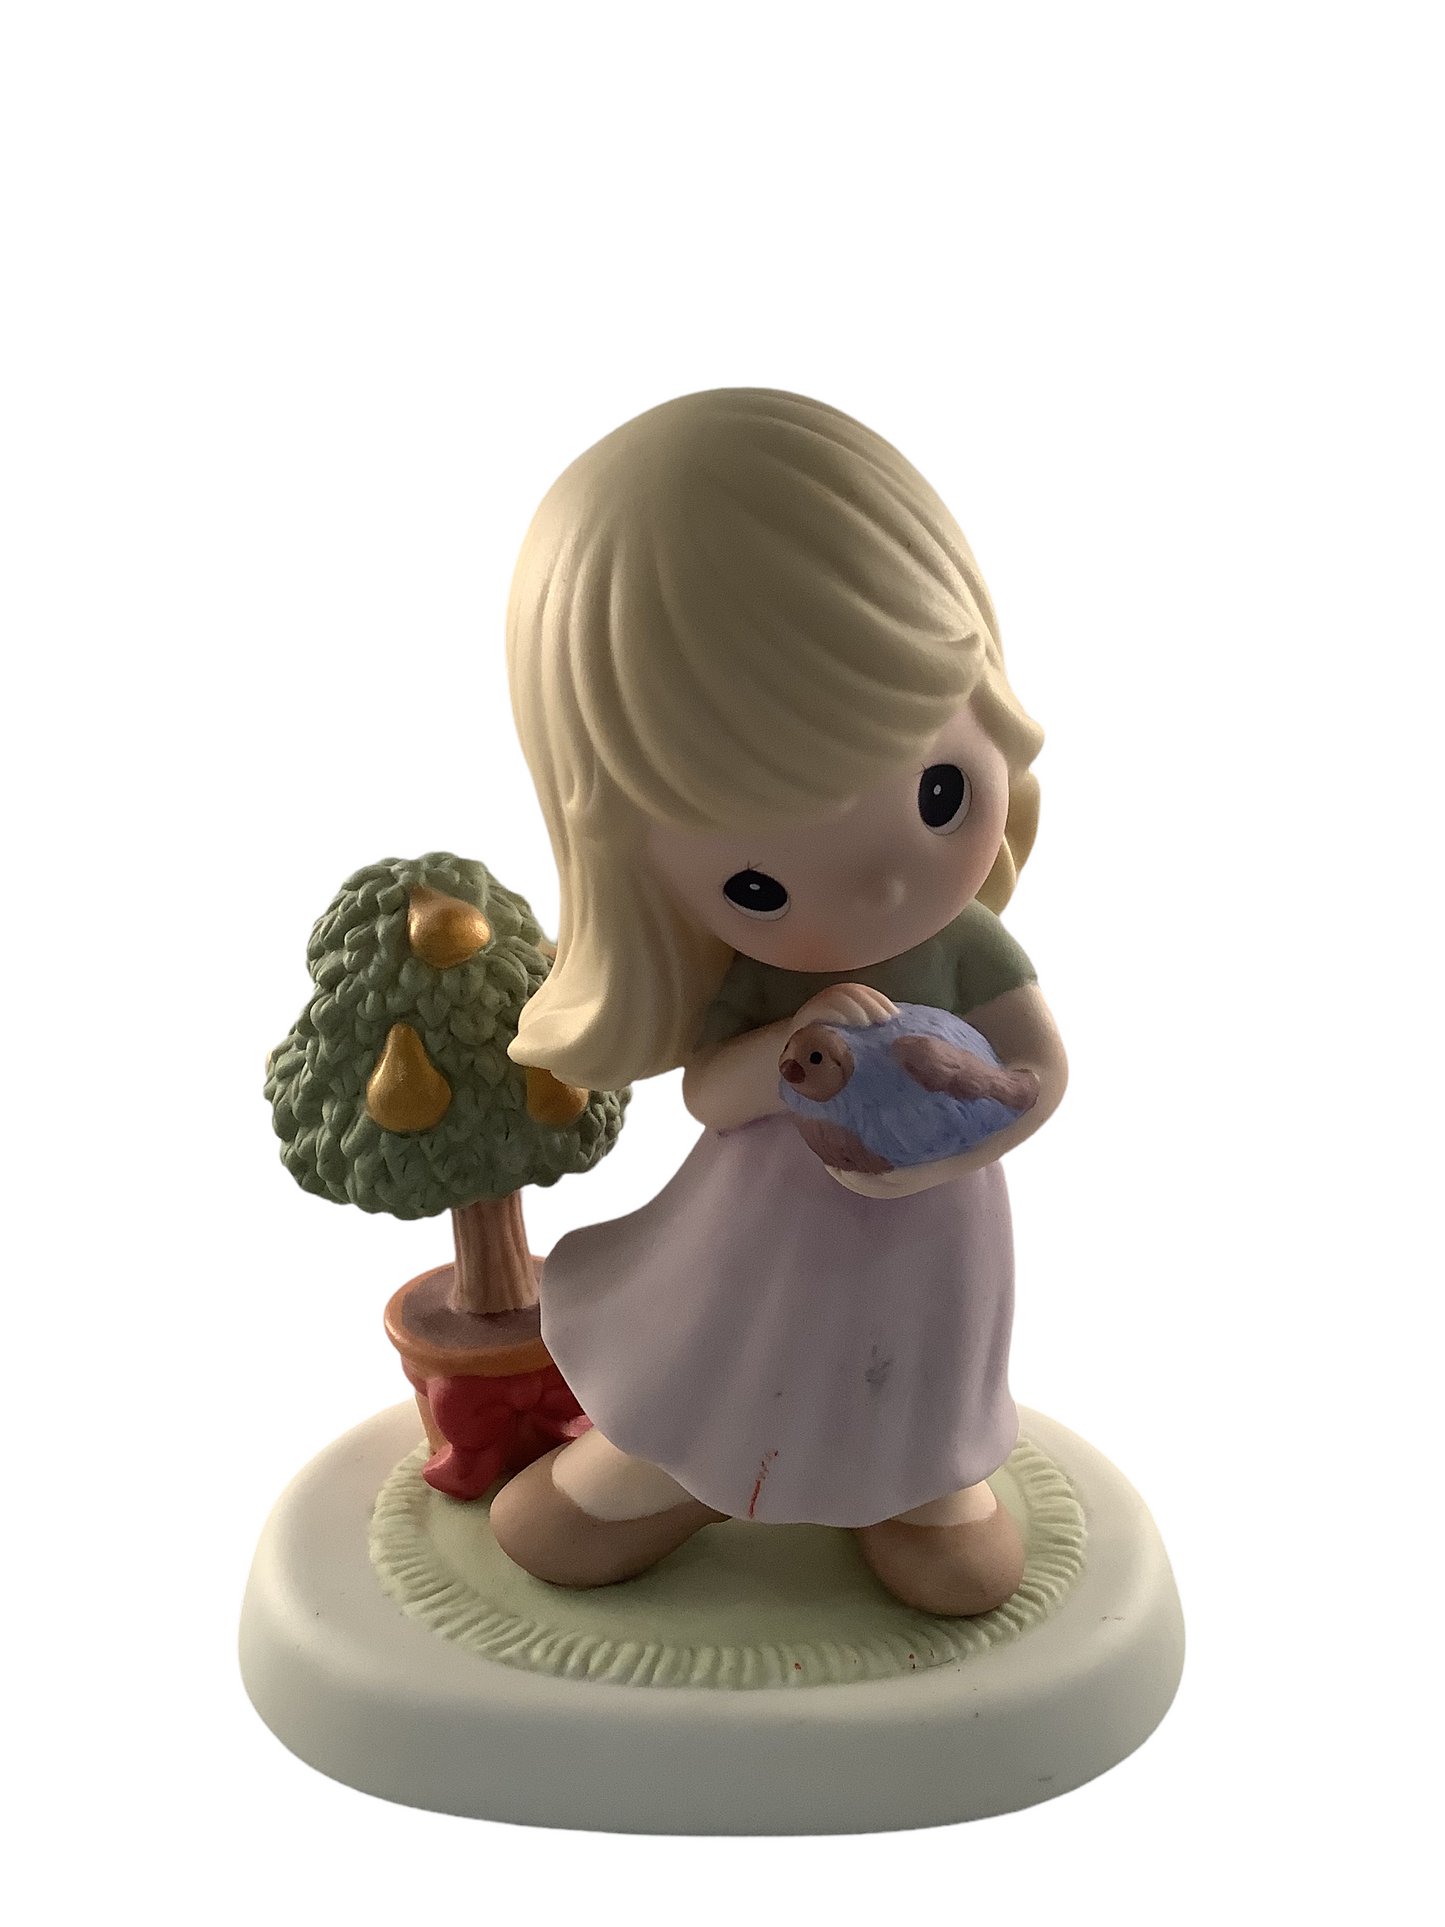 On The First Day Of Christmas... - Precious Moment Figurine